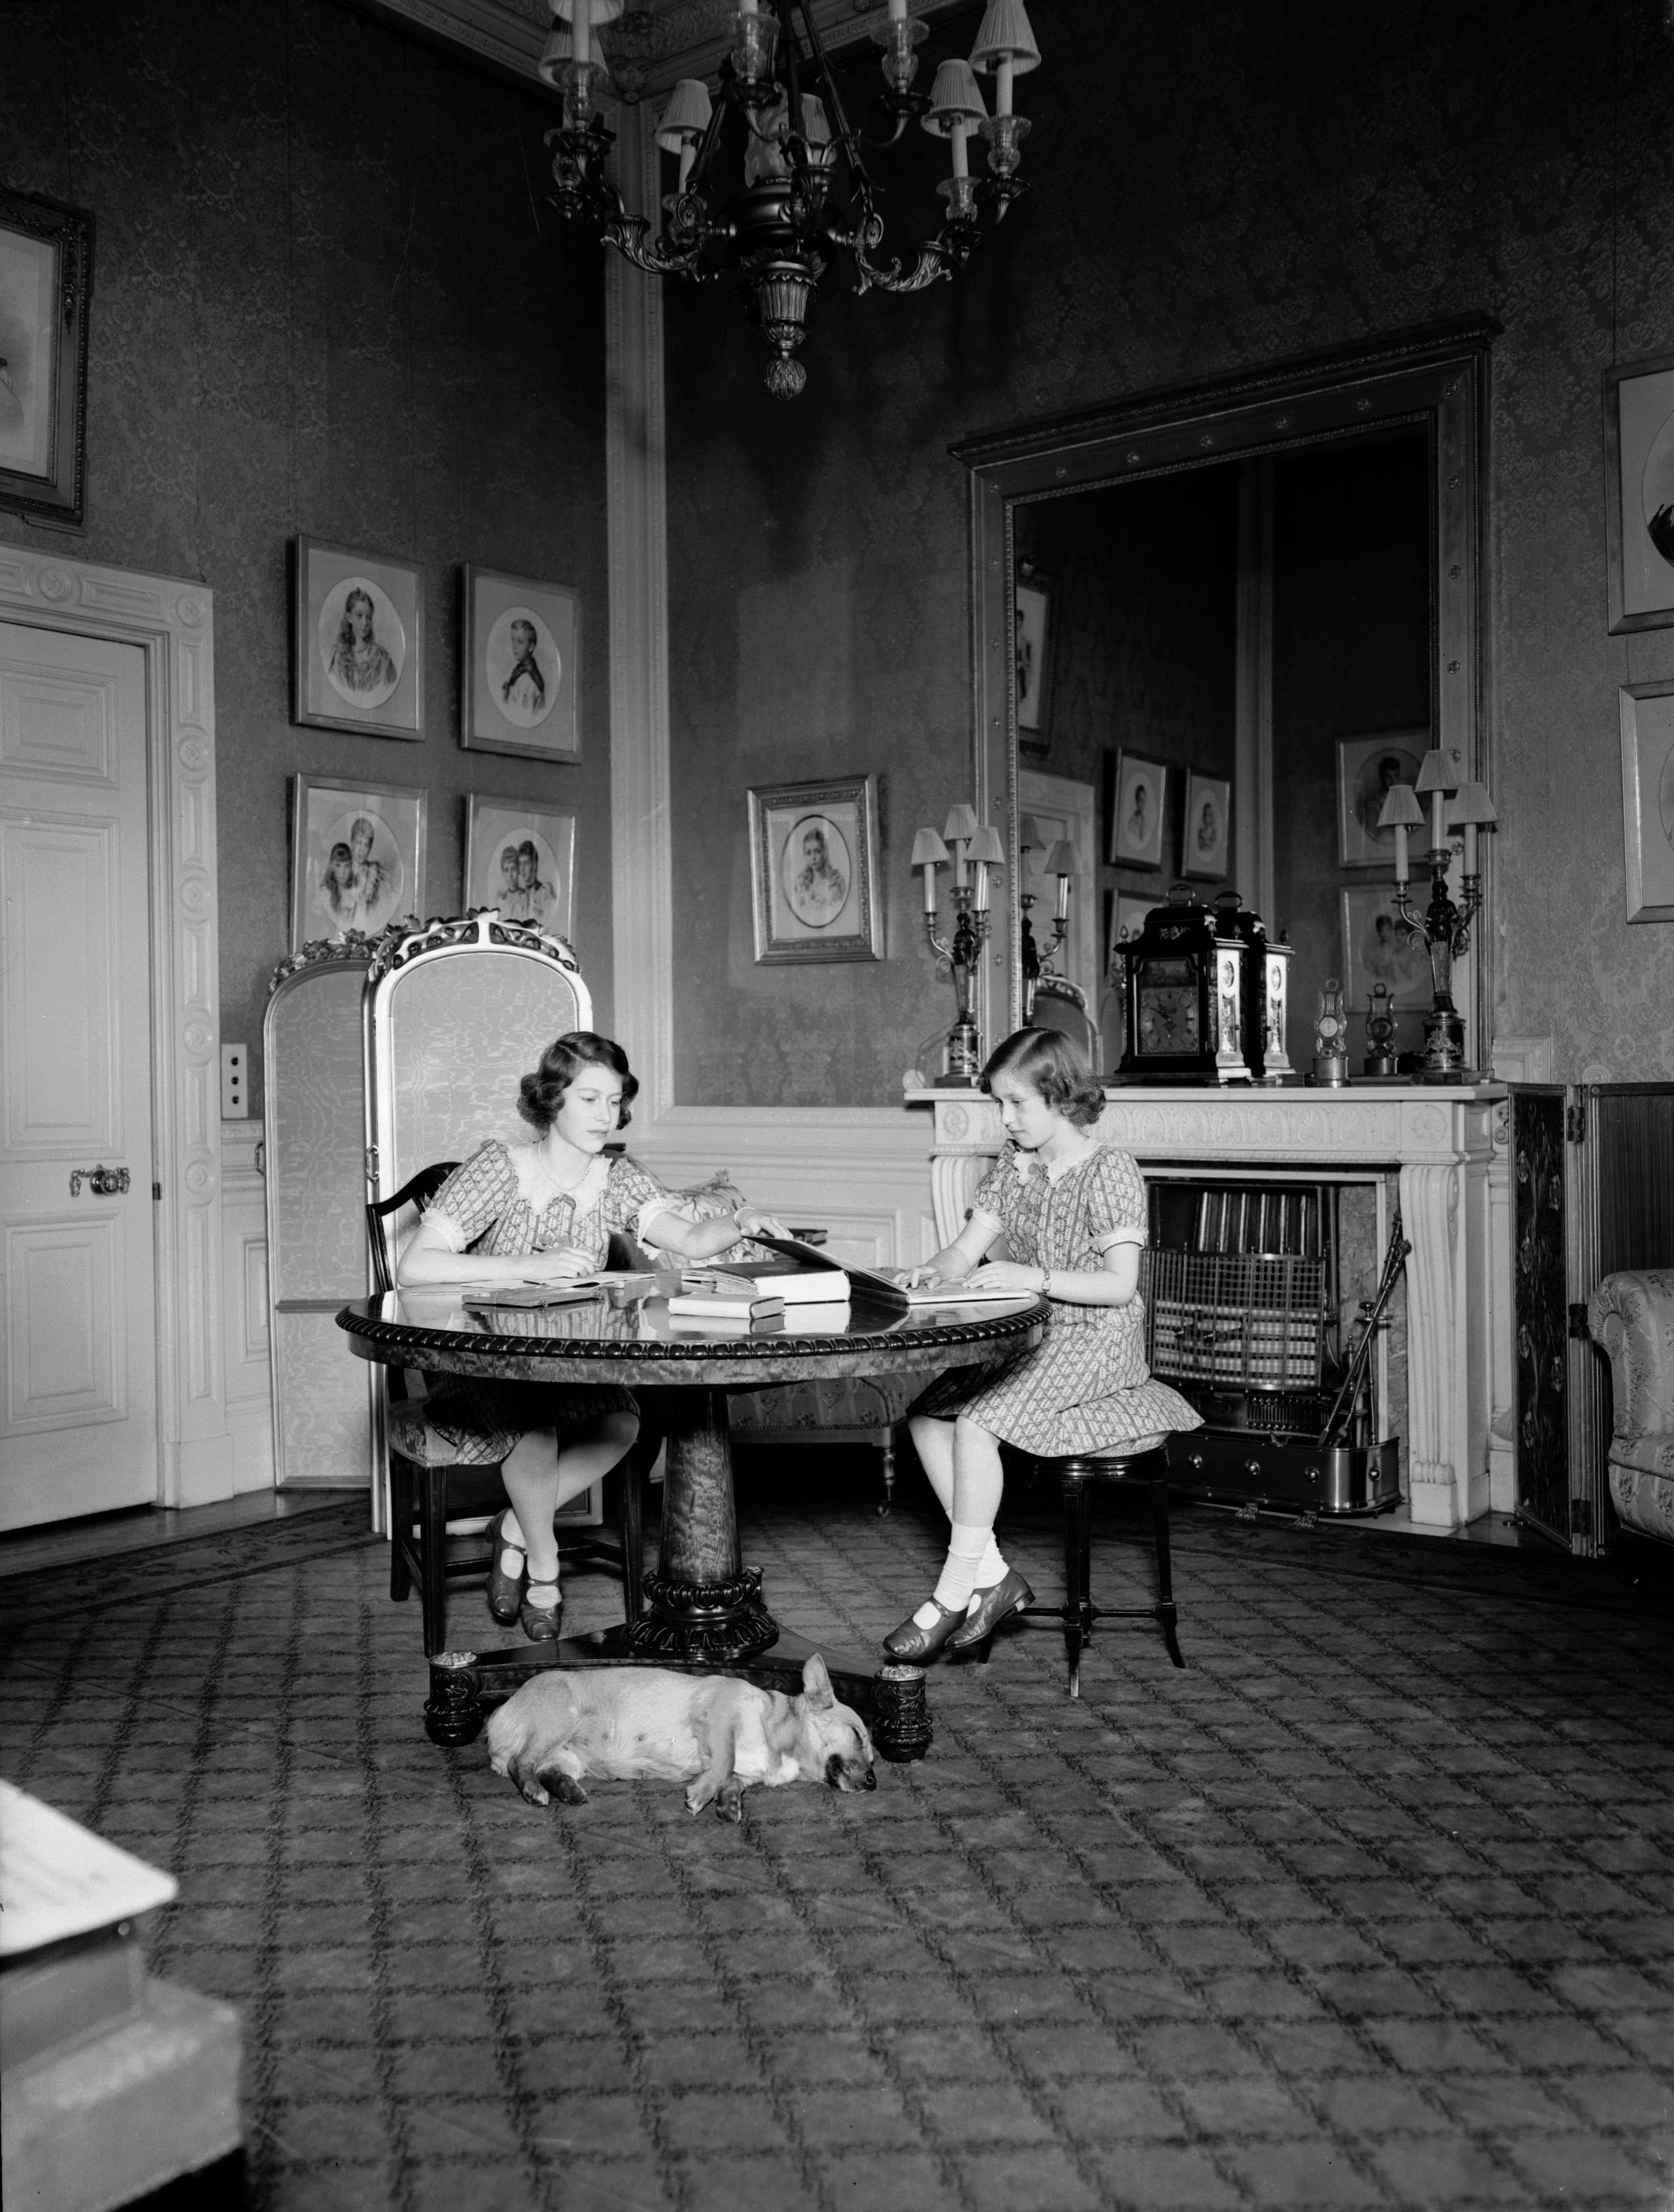 Princesses Elizabeth (left) and Margaret (1930 - 2002) studying whilst a corgi dog sleeps at their feet in a drawing room at Windsor Castle, Berkshire. | Source: Getty Images